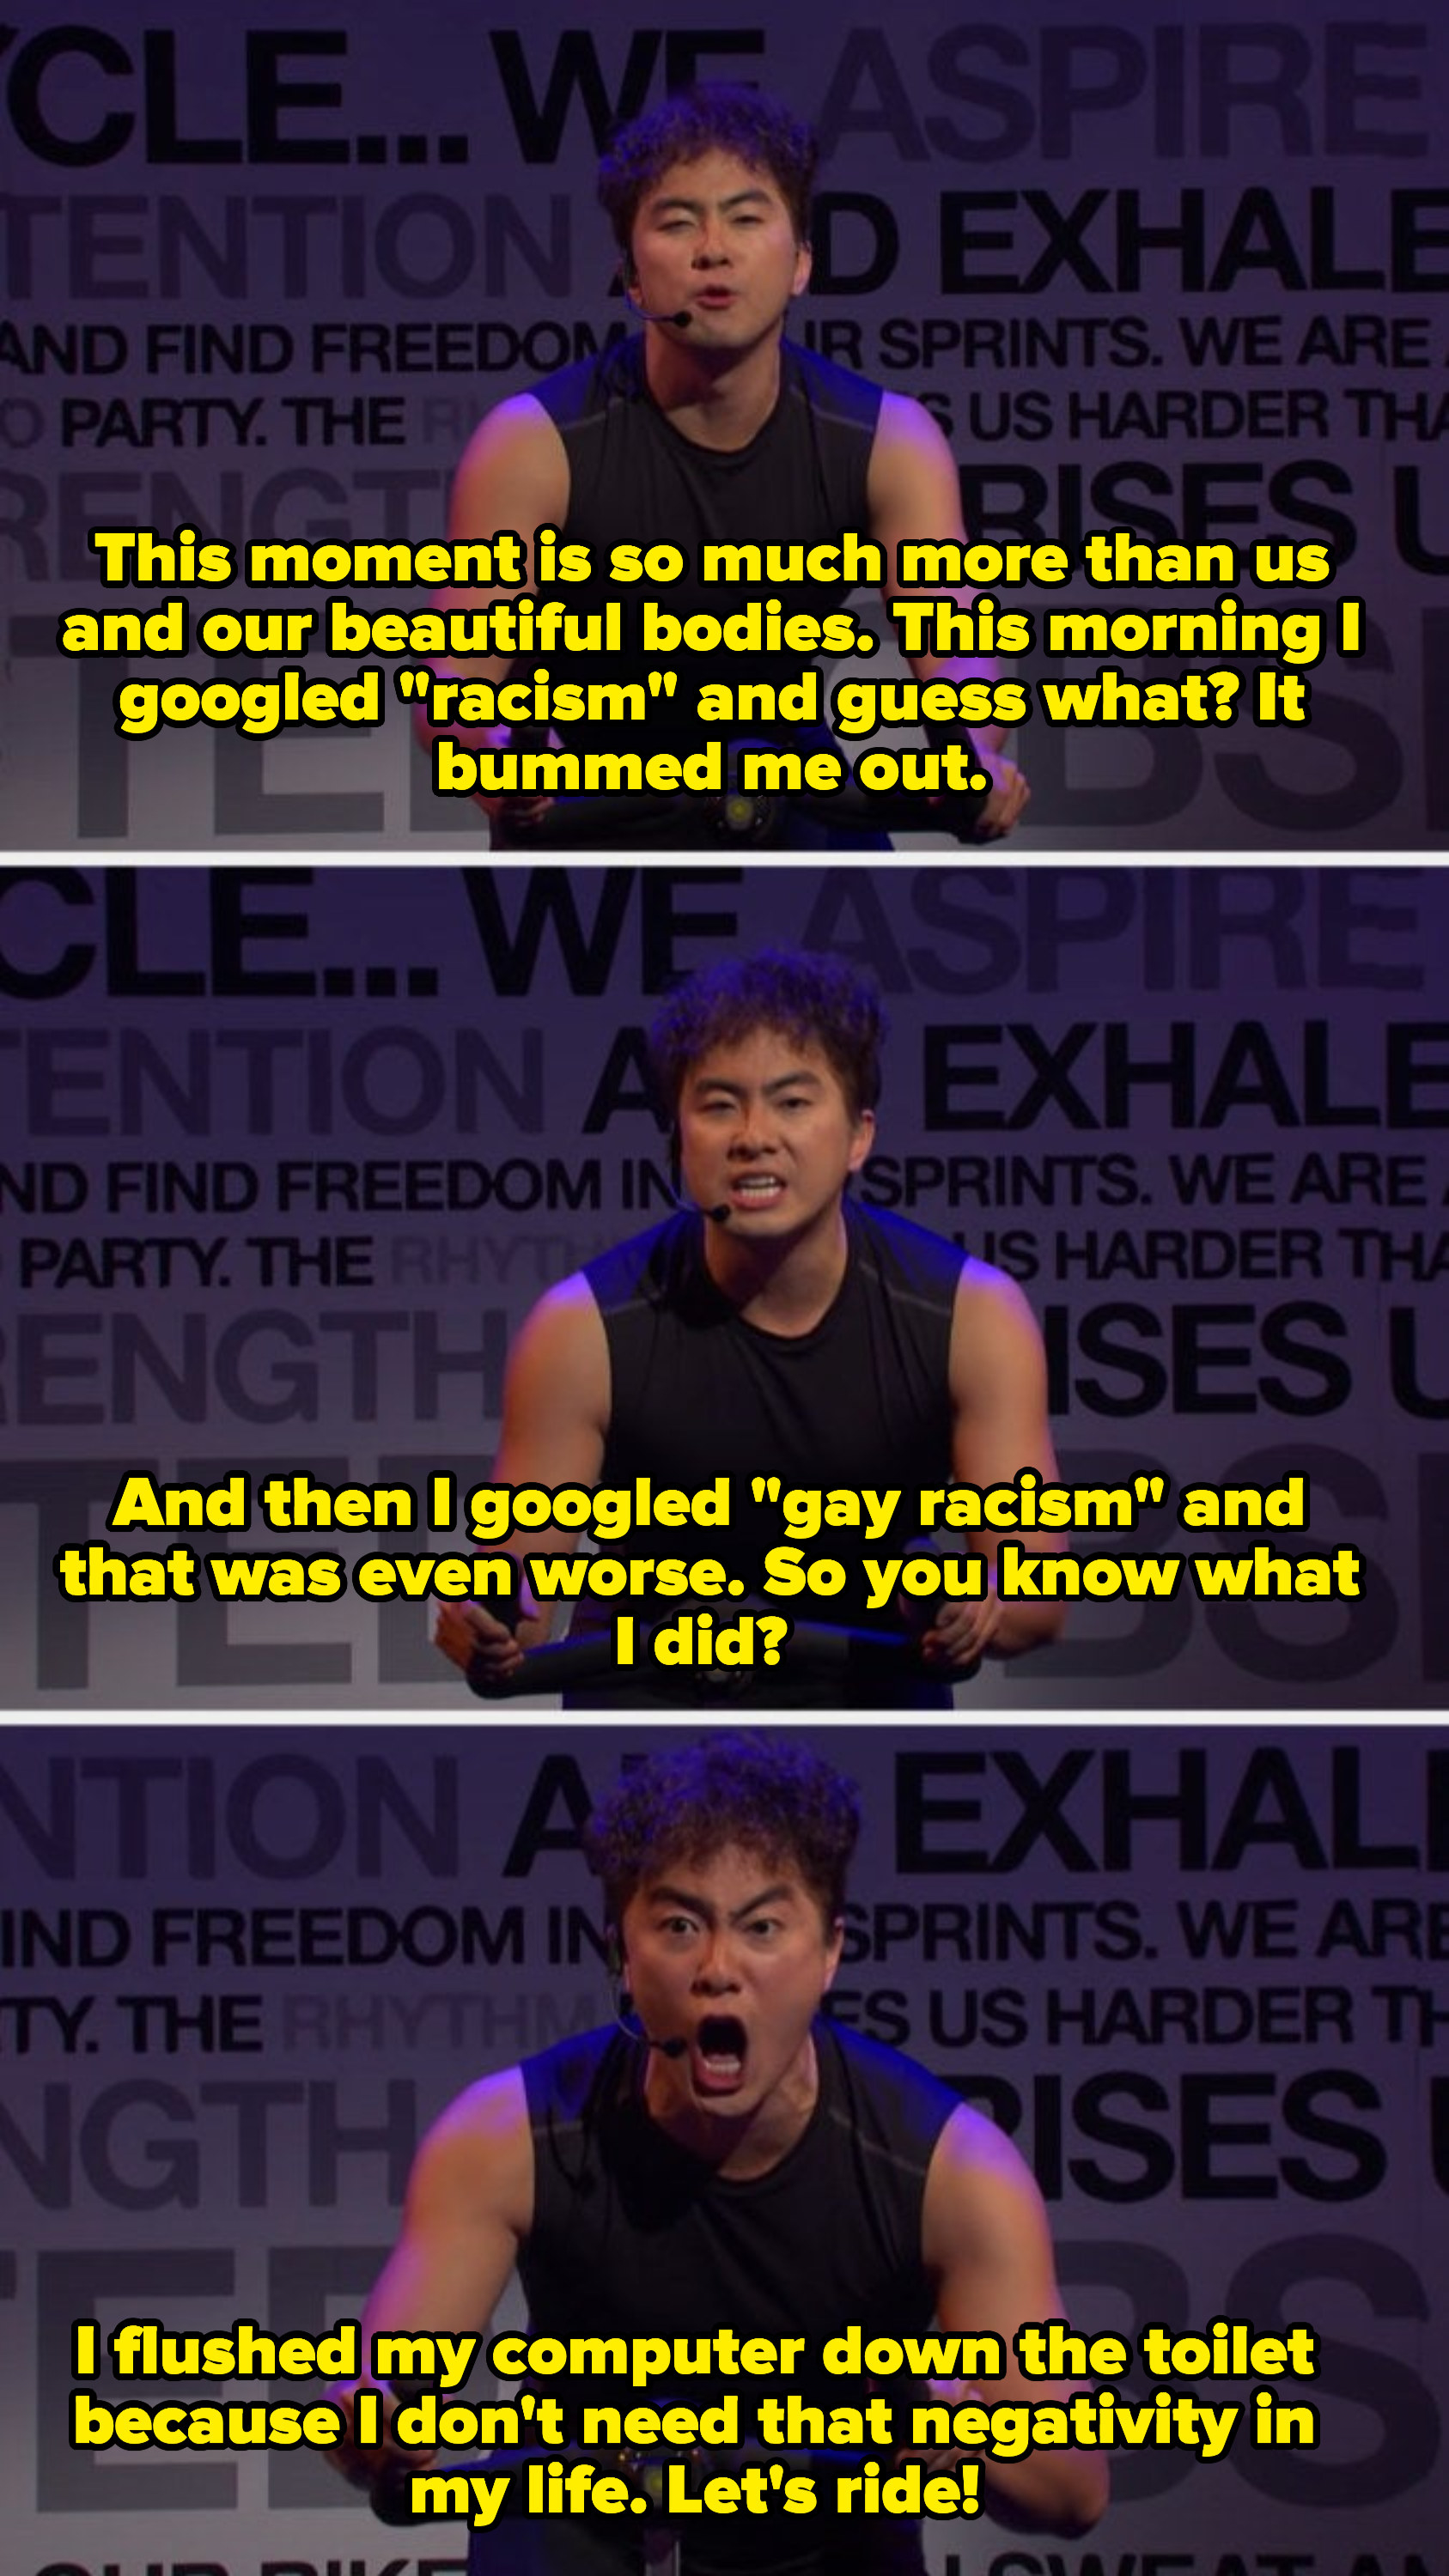 Bowen saying googling racism bummed him out and gay racism was even worse, so he flushed his computer down the toilet because he didn&#x27;t need the negativity